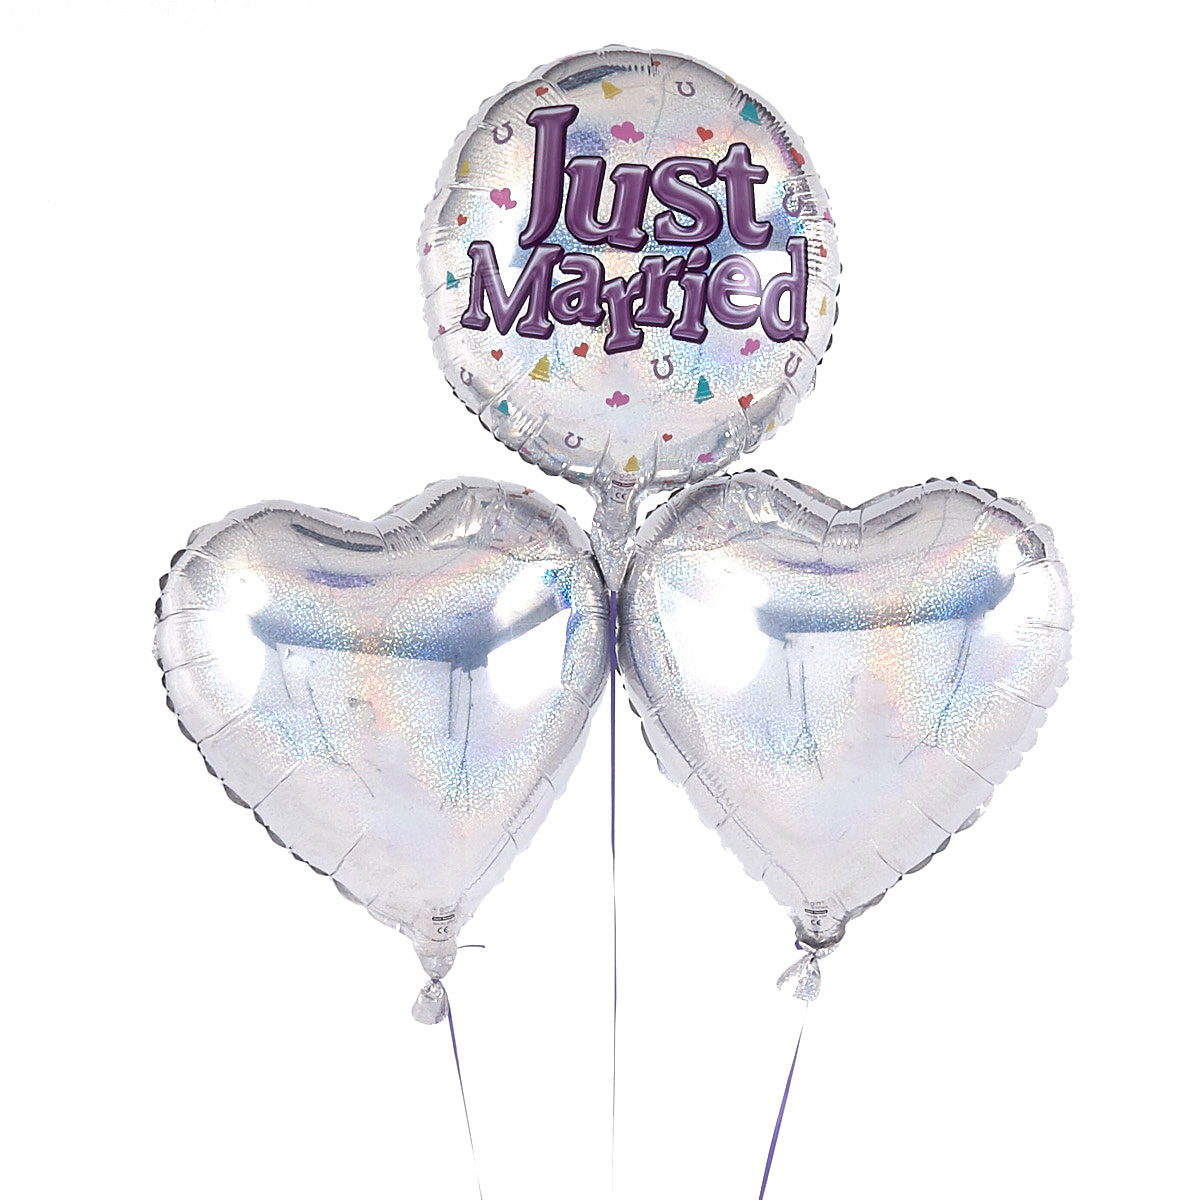 Just Married  Circle Romantic Balloon Bouquet - DELIVERED INFLATED!